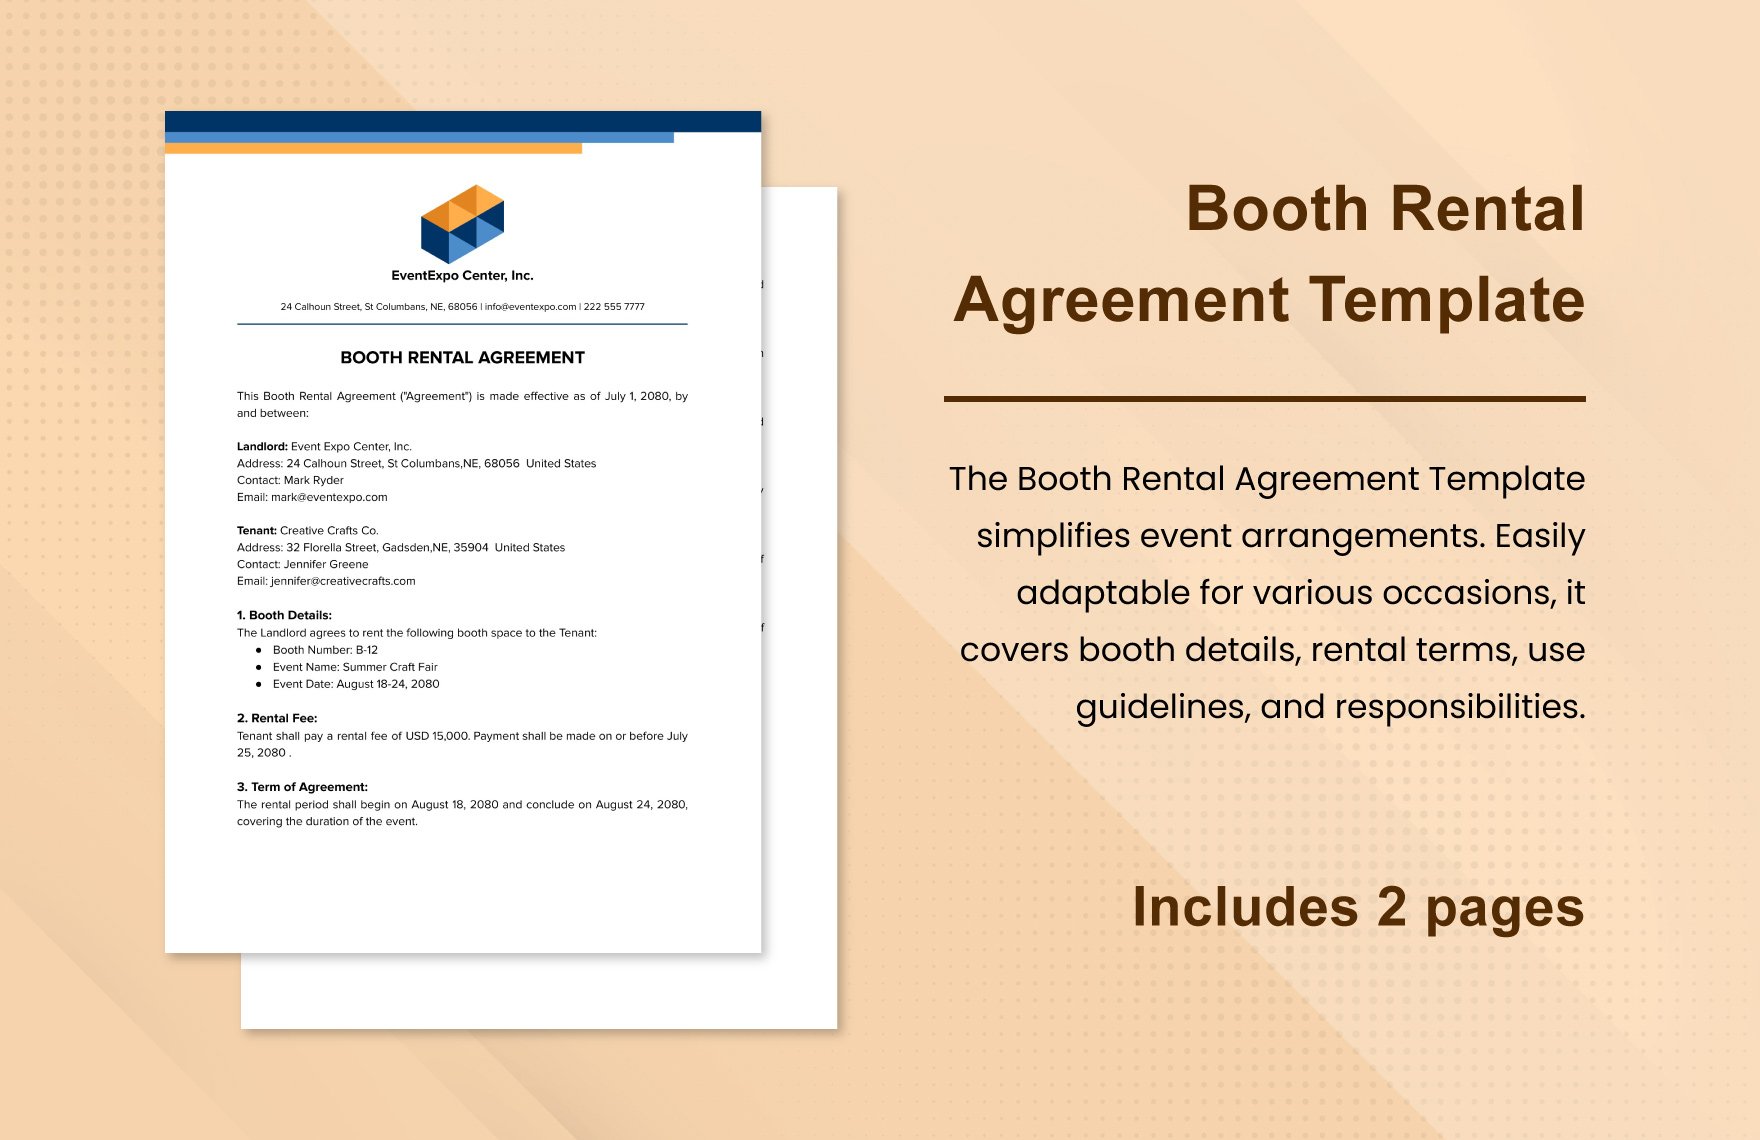 Booth Rental Agreement Template